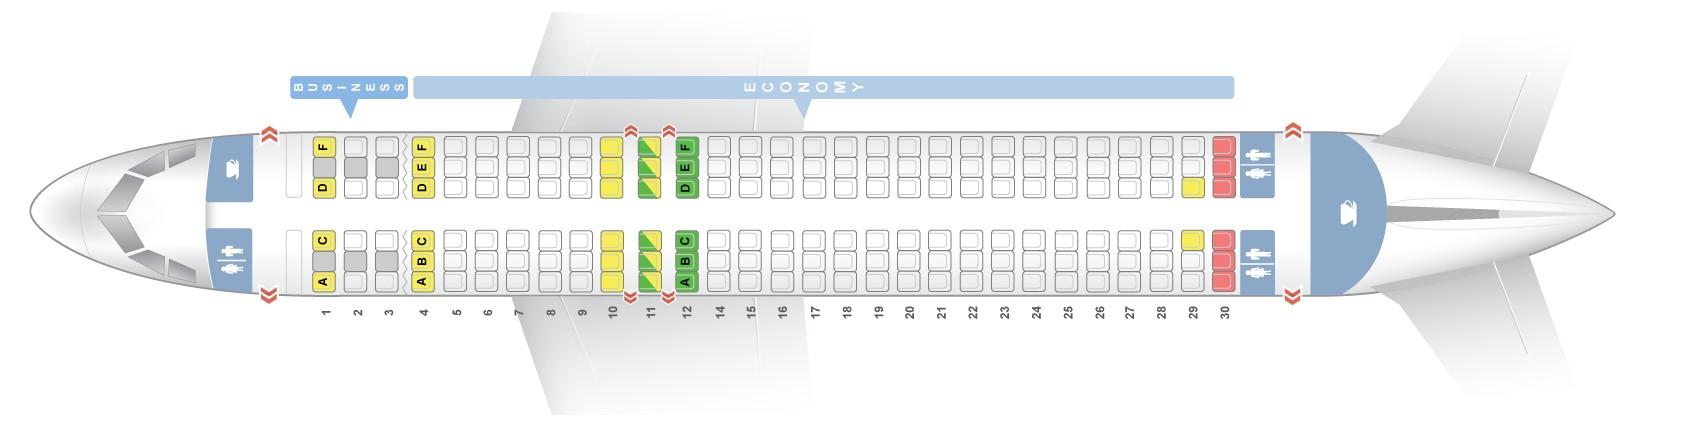 Seat map Airbus A320 Aegean Airlines. Best seats in the plane